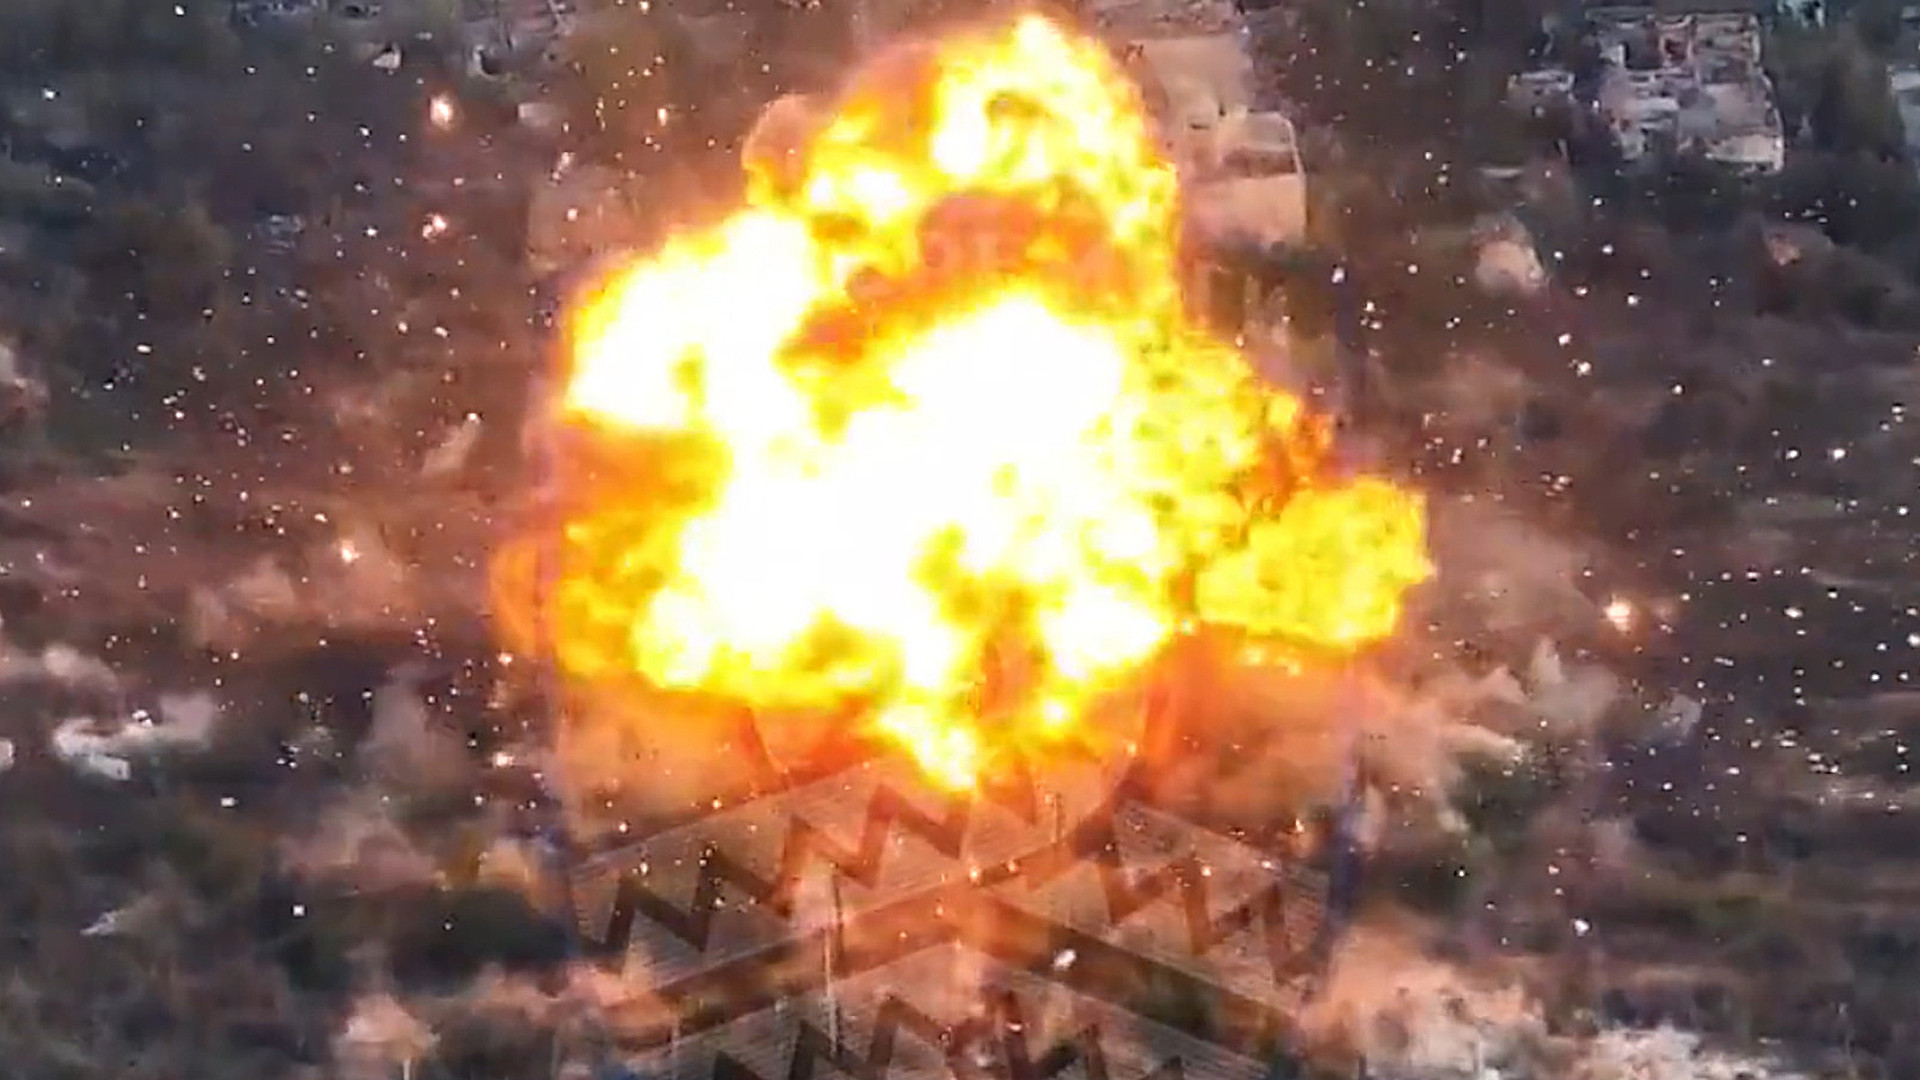 Russian TOS-1A Thermobaric Rocket Launcher Absolutely Detonates When Hit By Drone